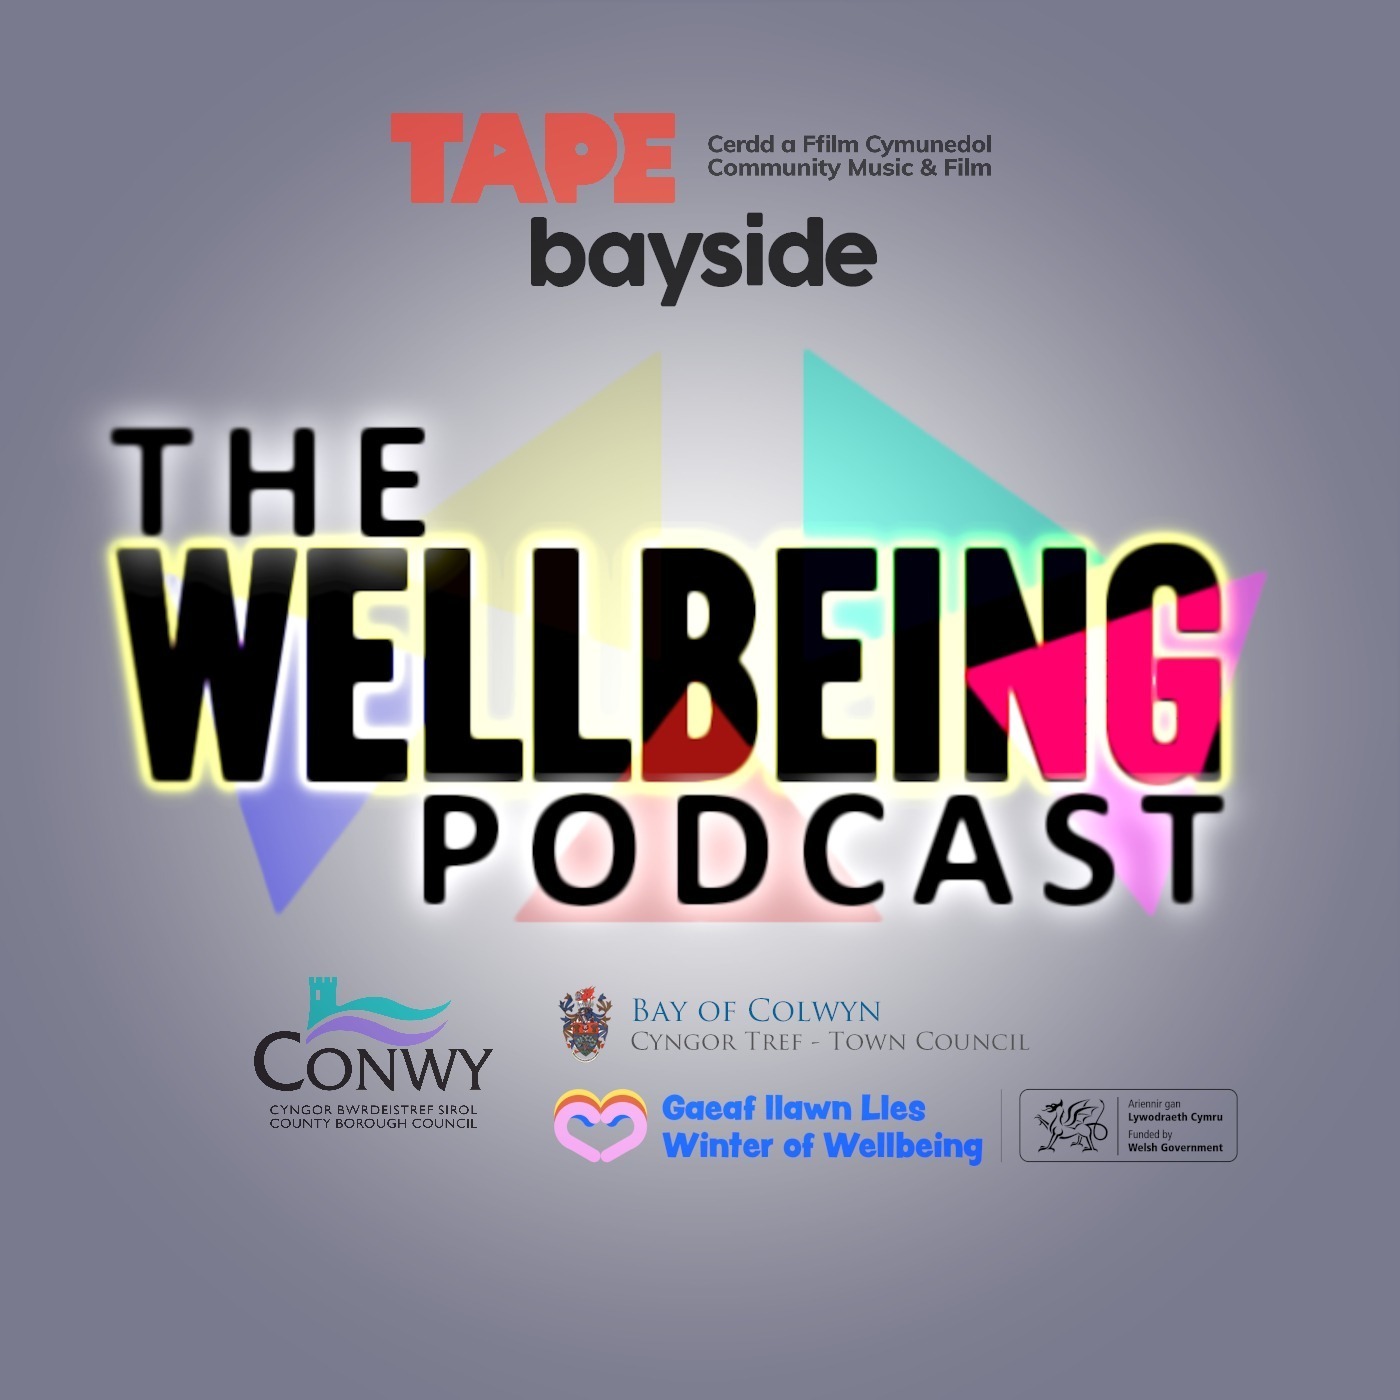 The Wellbeing Podcast - E02 - 'Video Games' (Niall Jones)